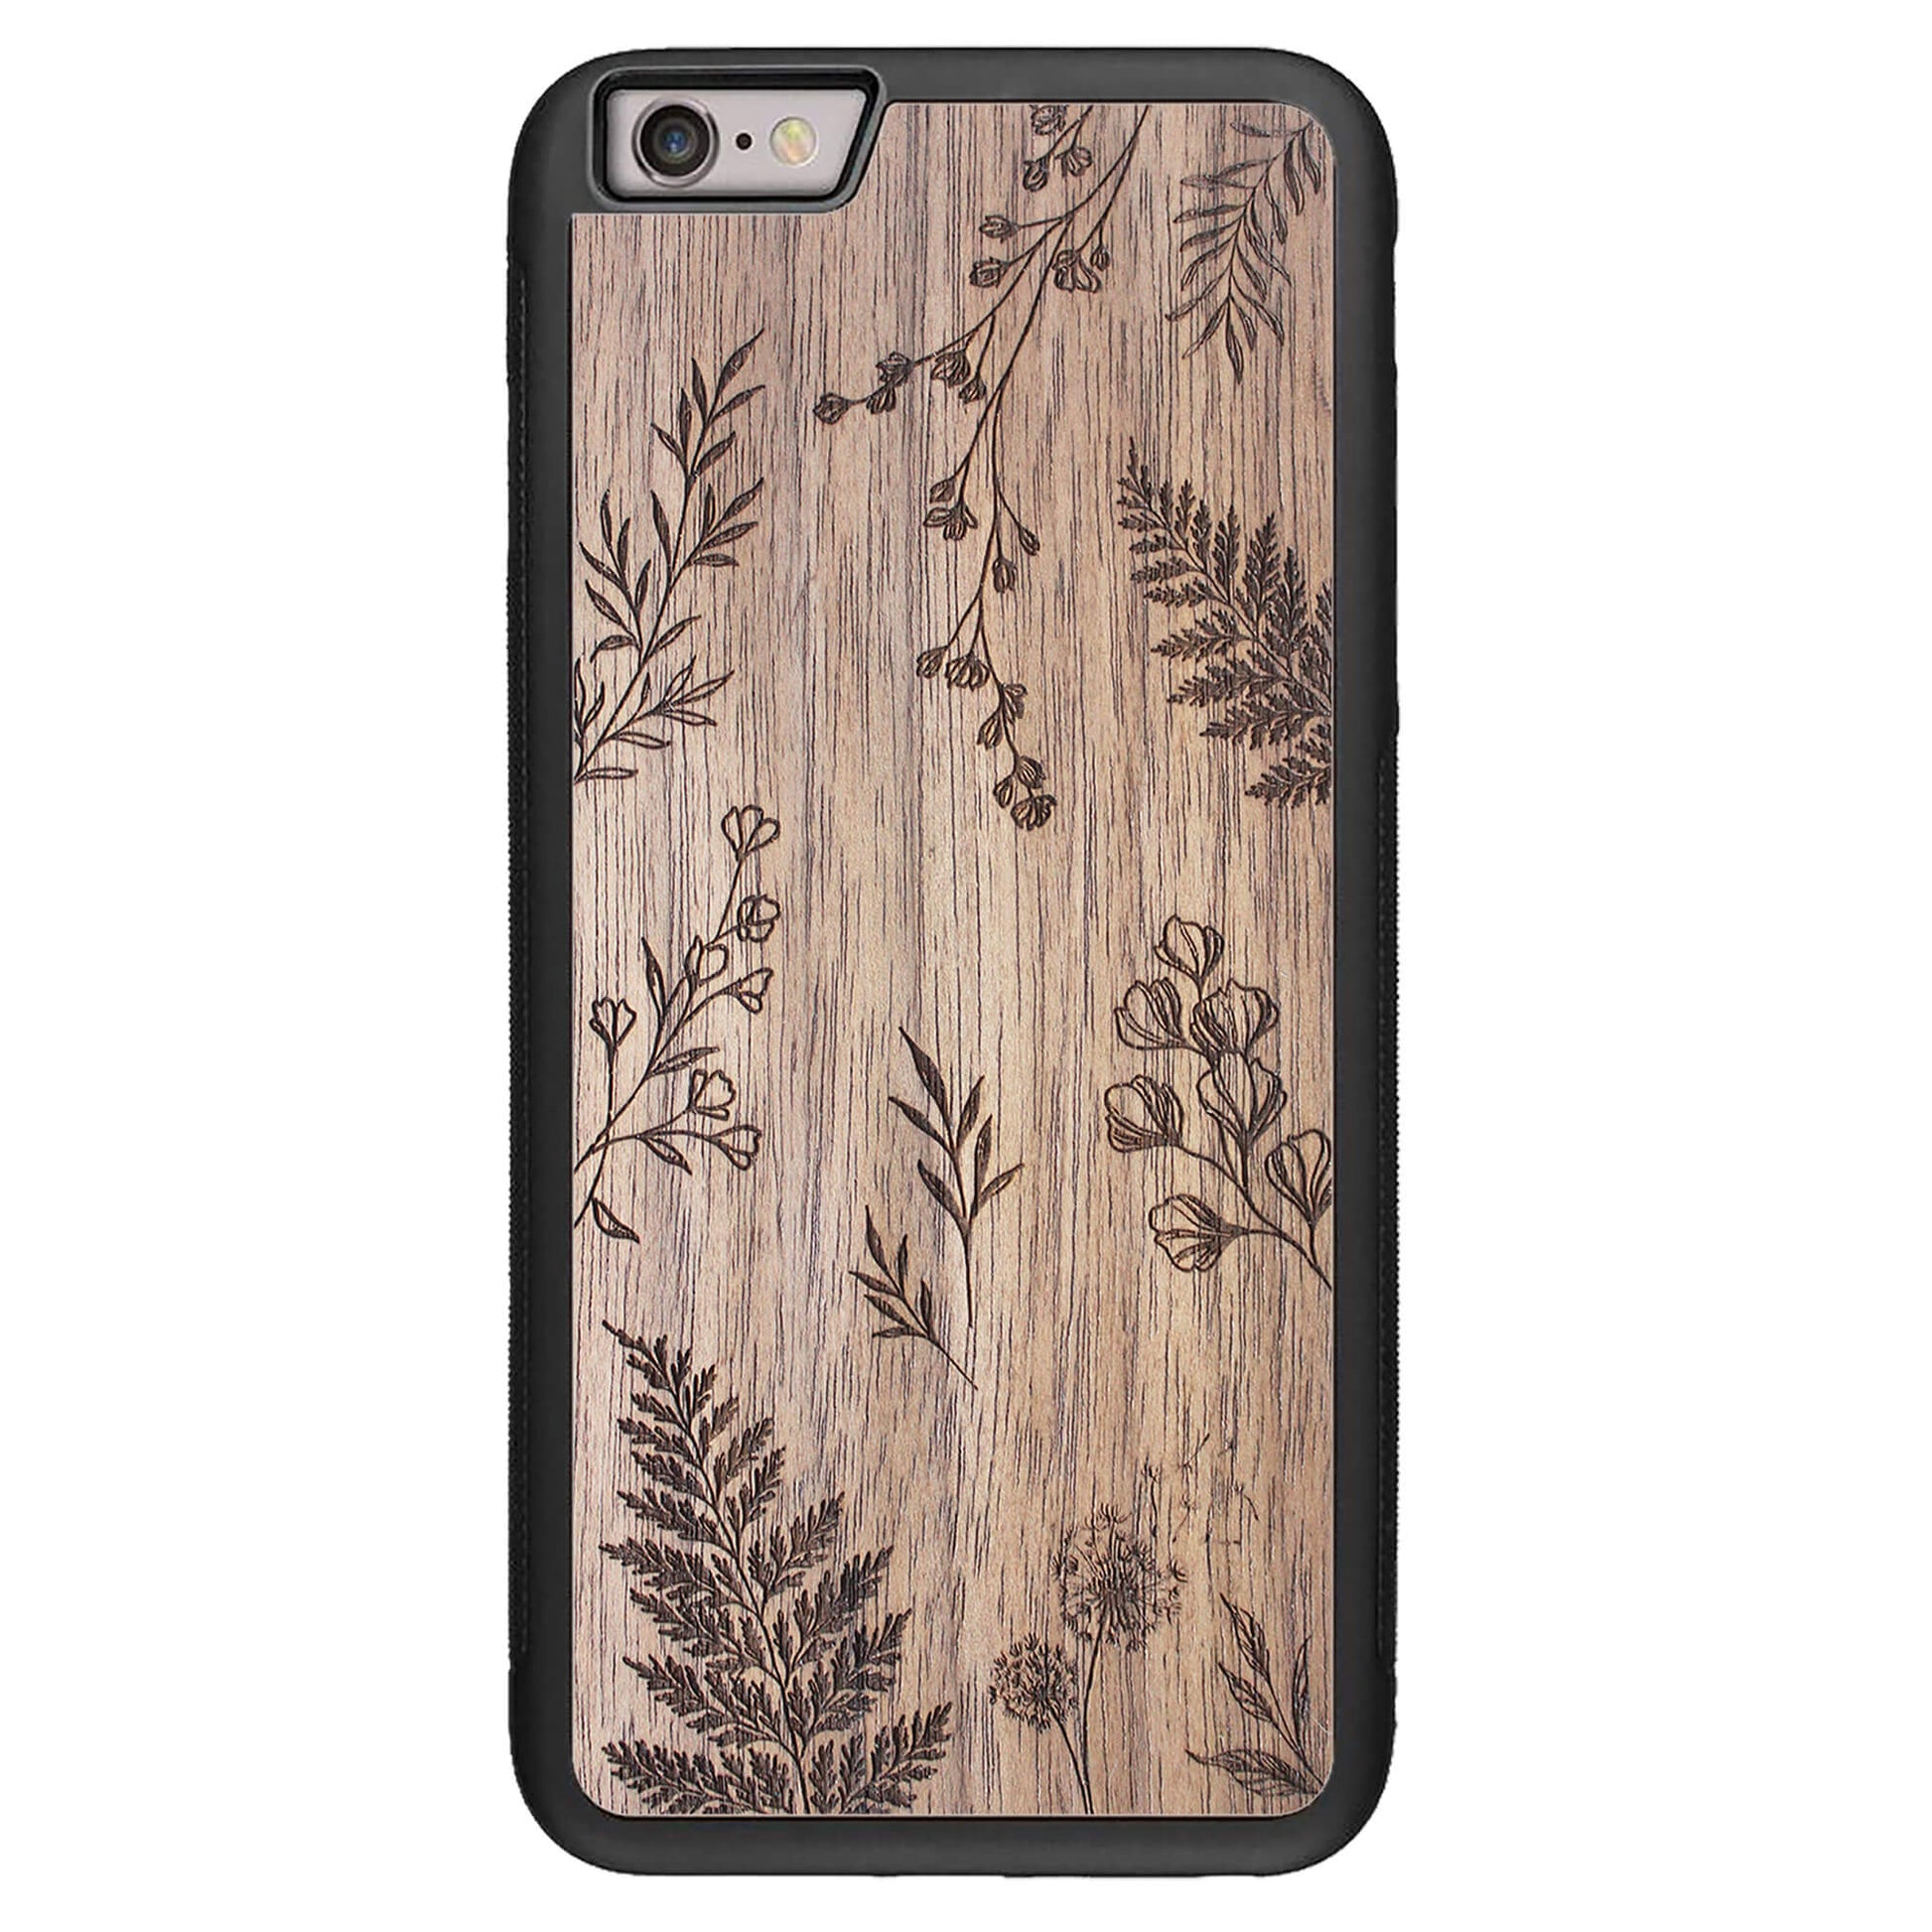 Wooden Case for iPhone 6/6S Plus Botanical